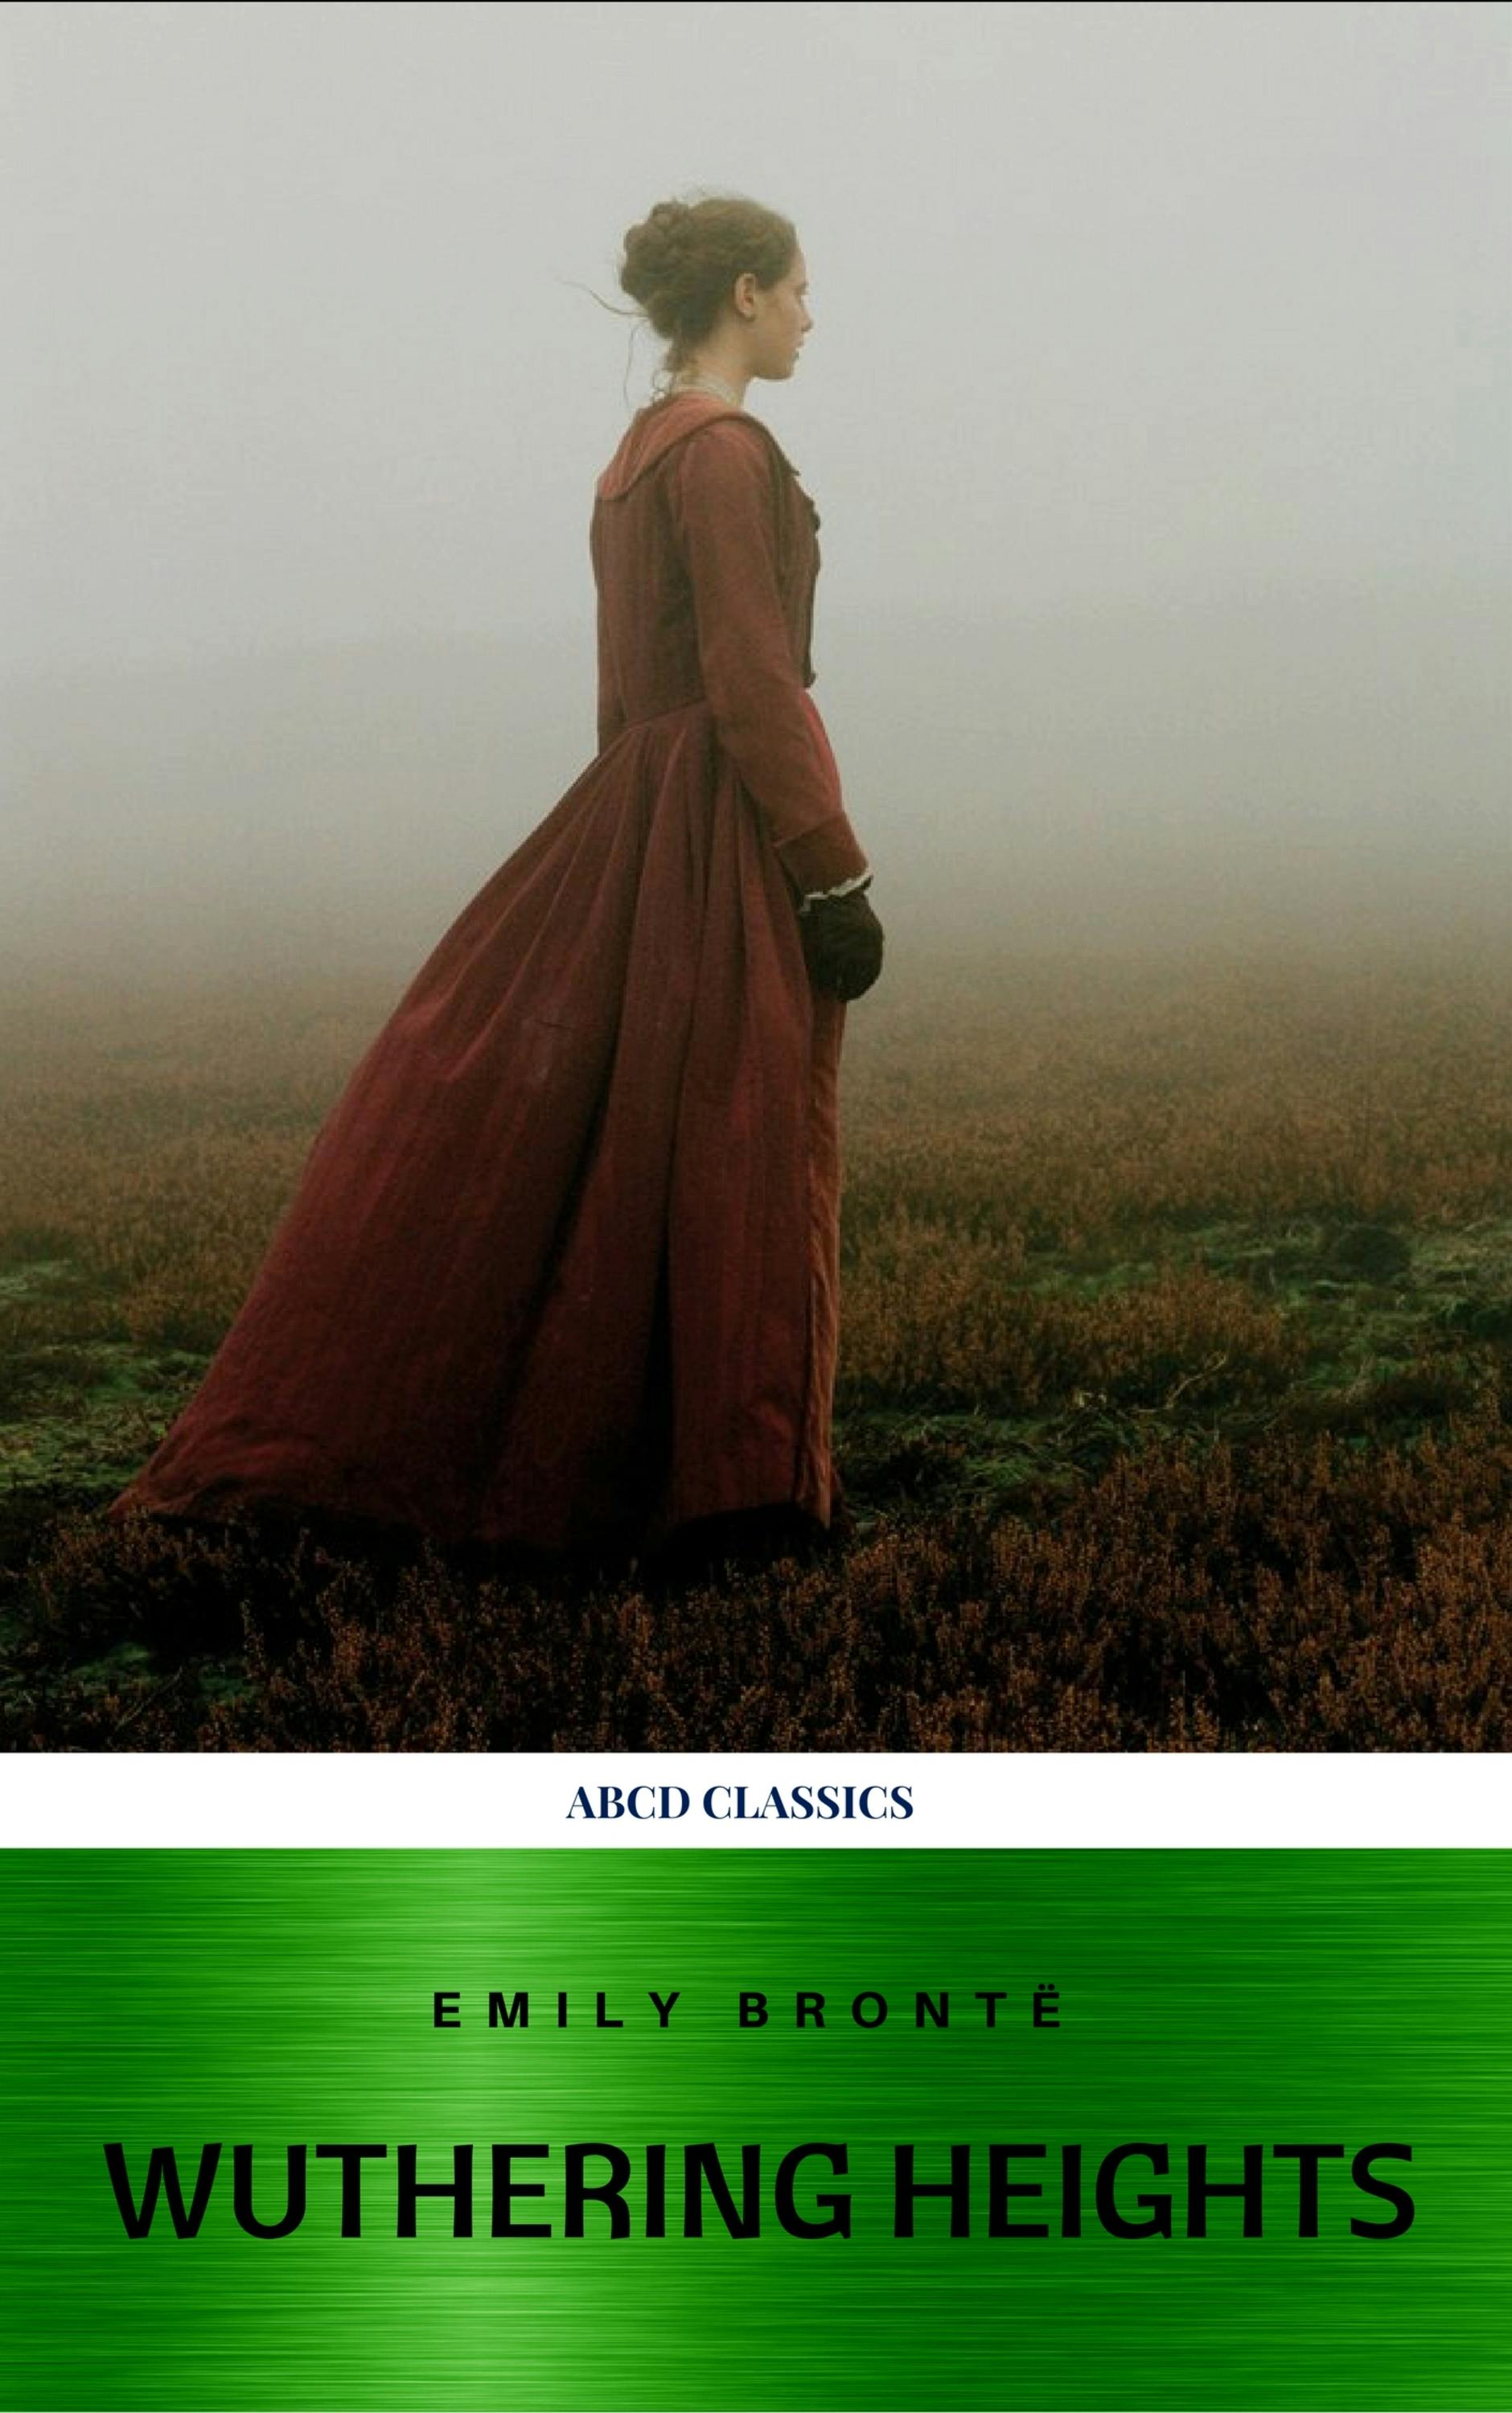 Wuthering Heights - ABCD Classics, Emily Brontë